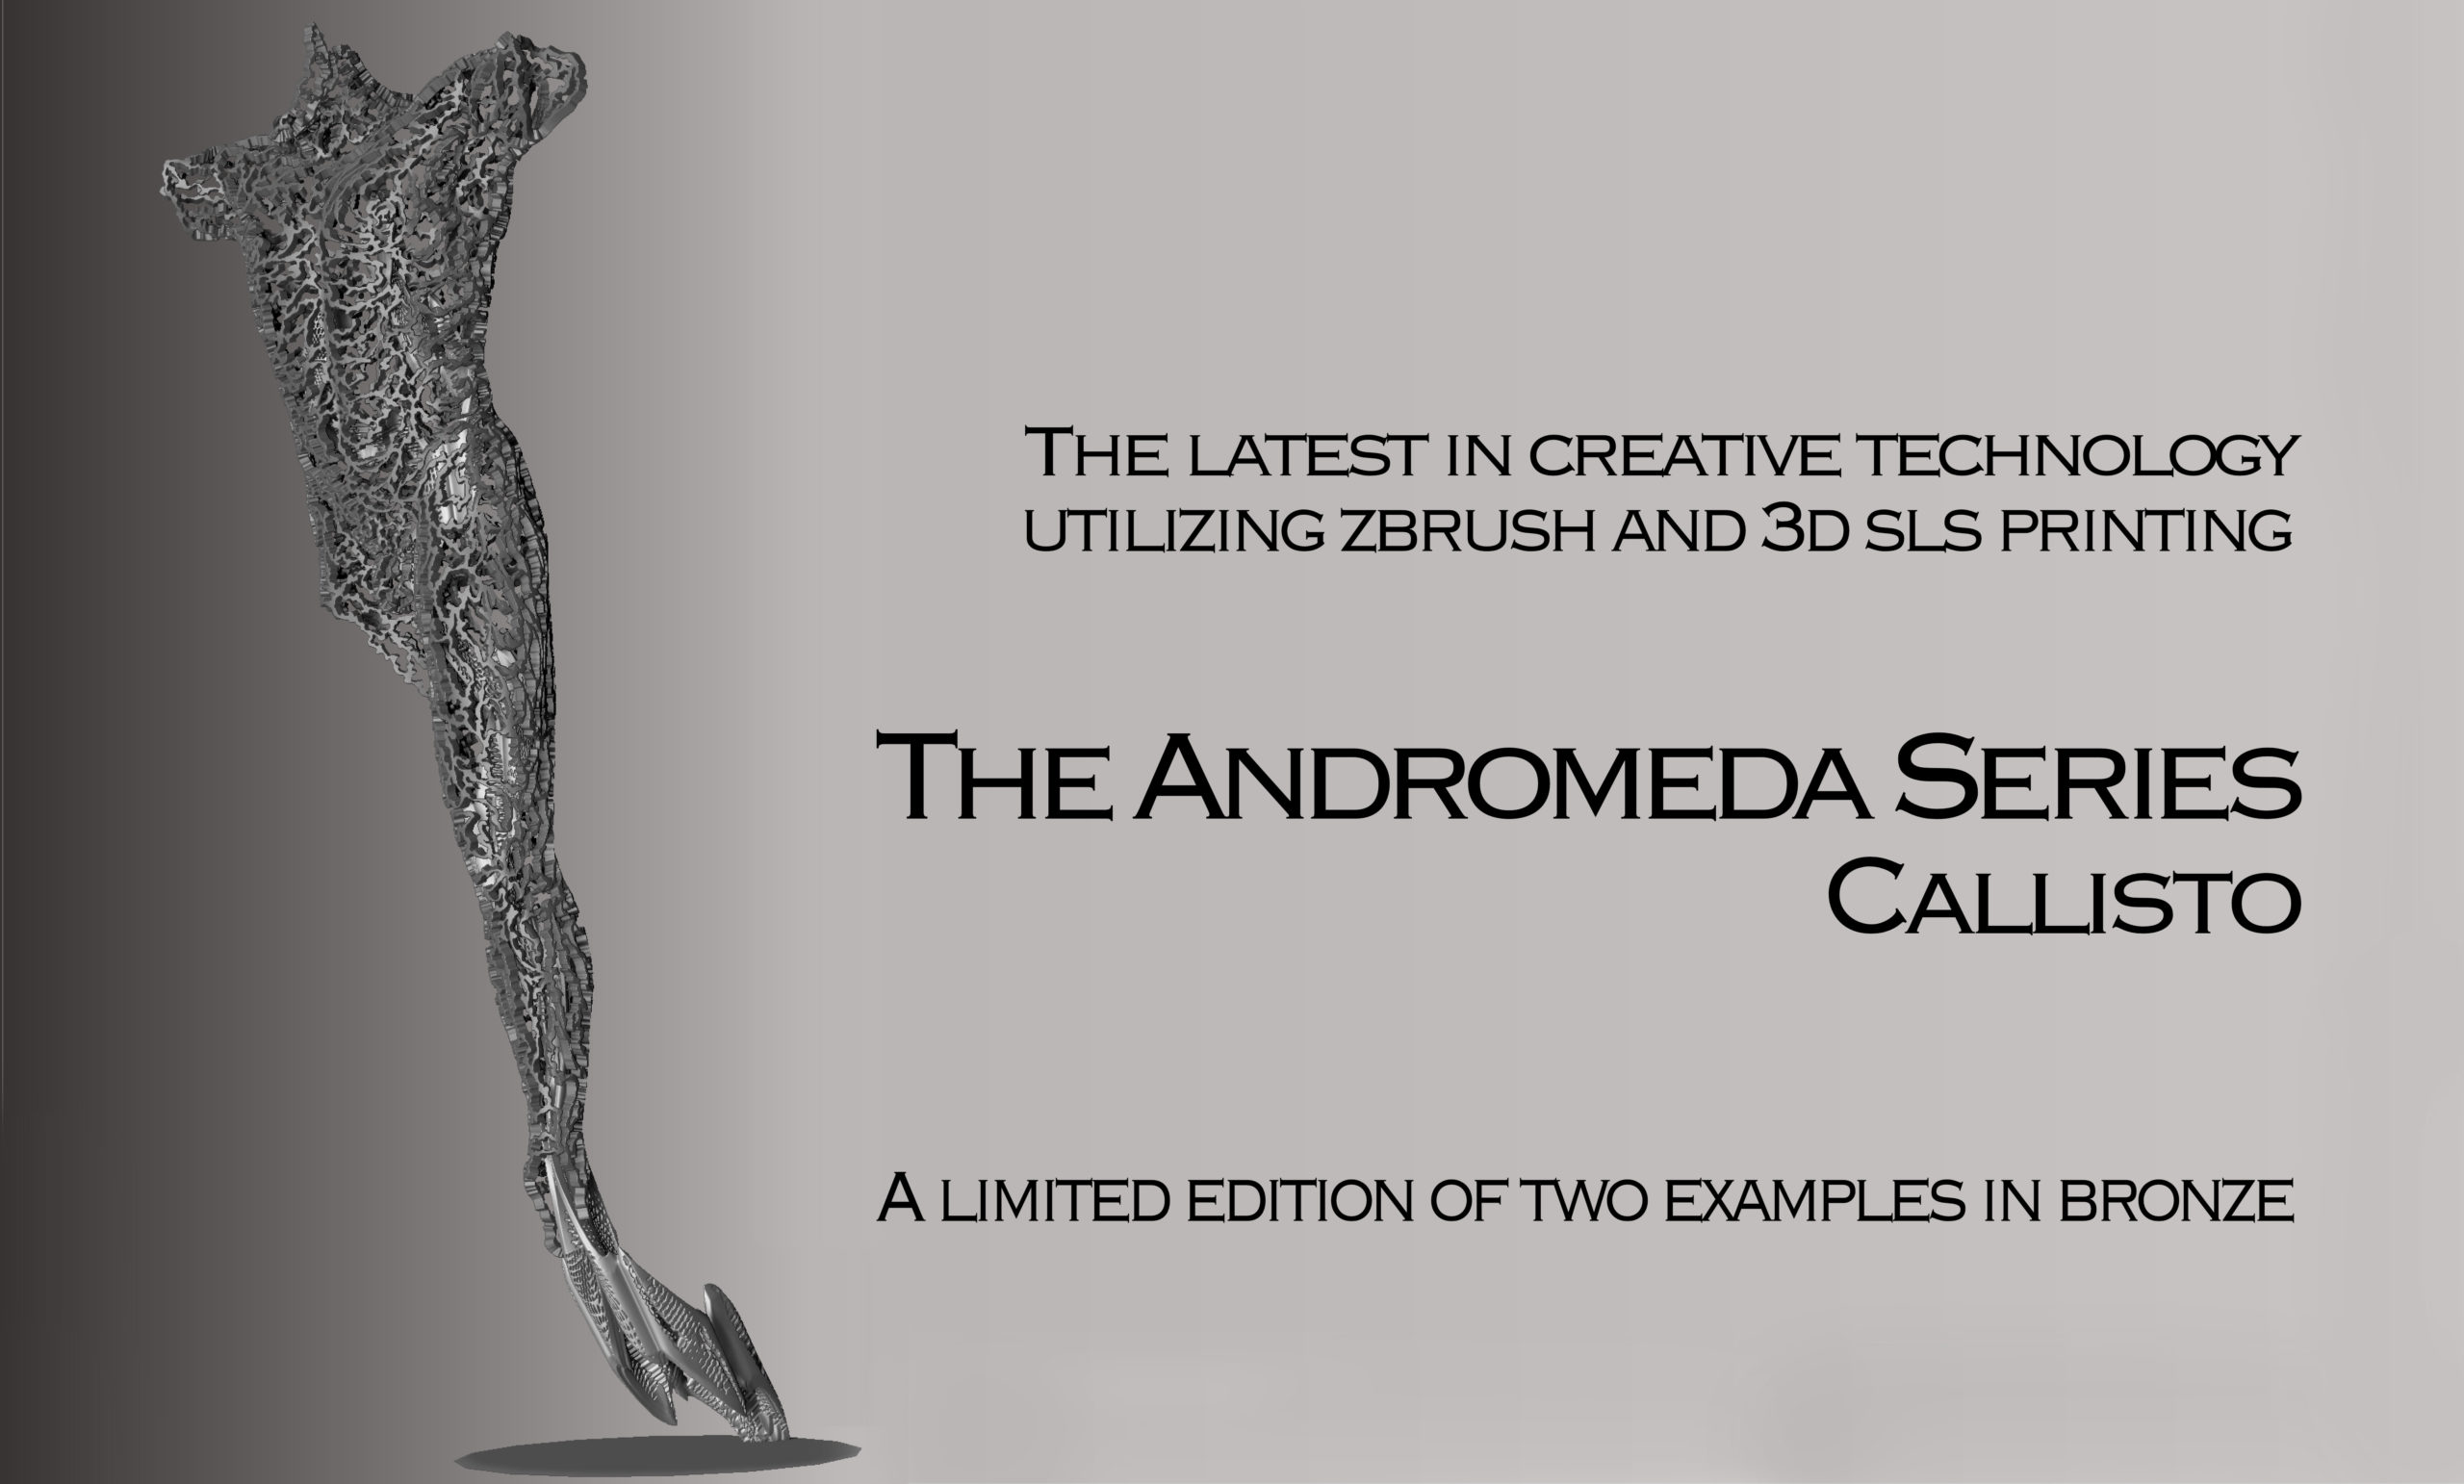 Photo of an promotional poster for the Andromeda Series of 3D printed sculpture.